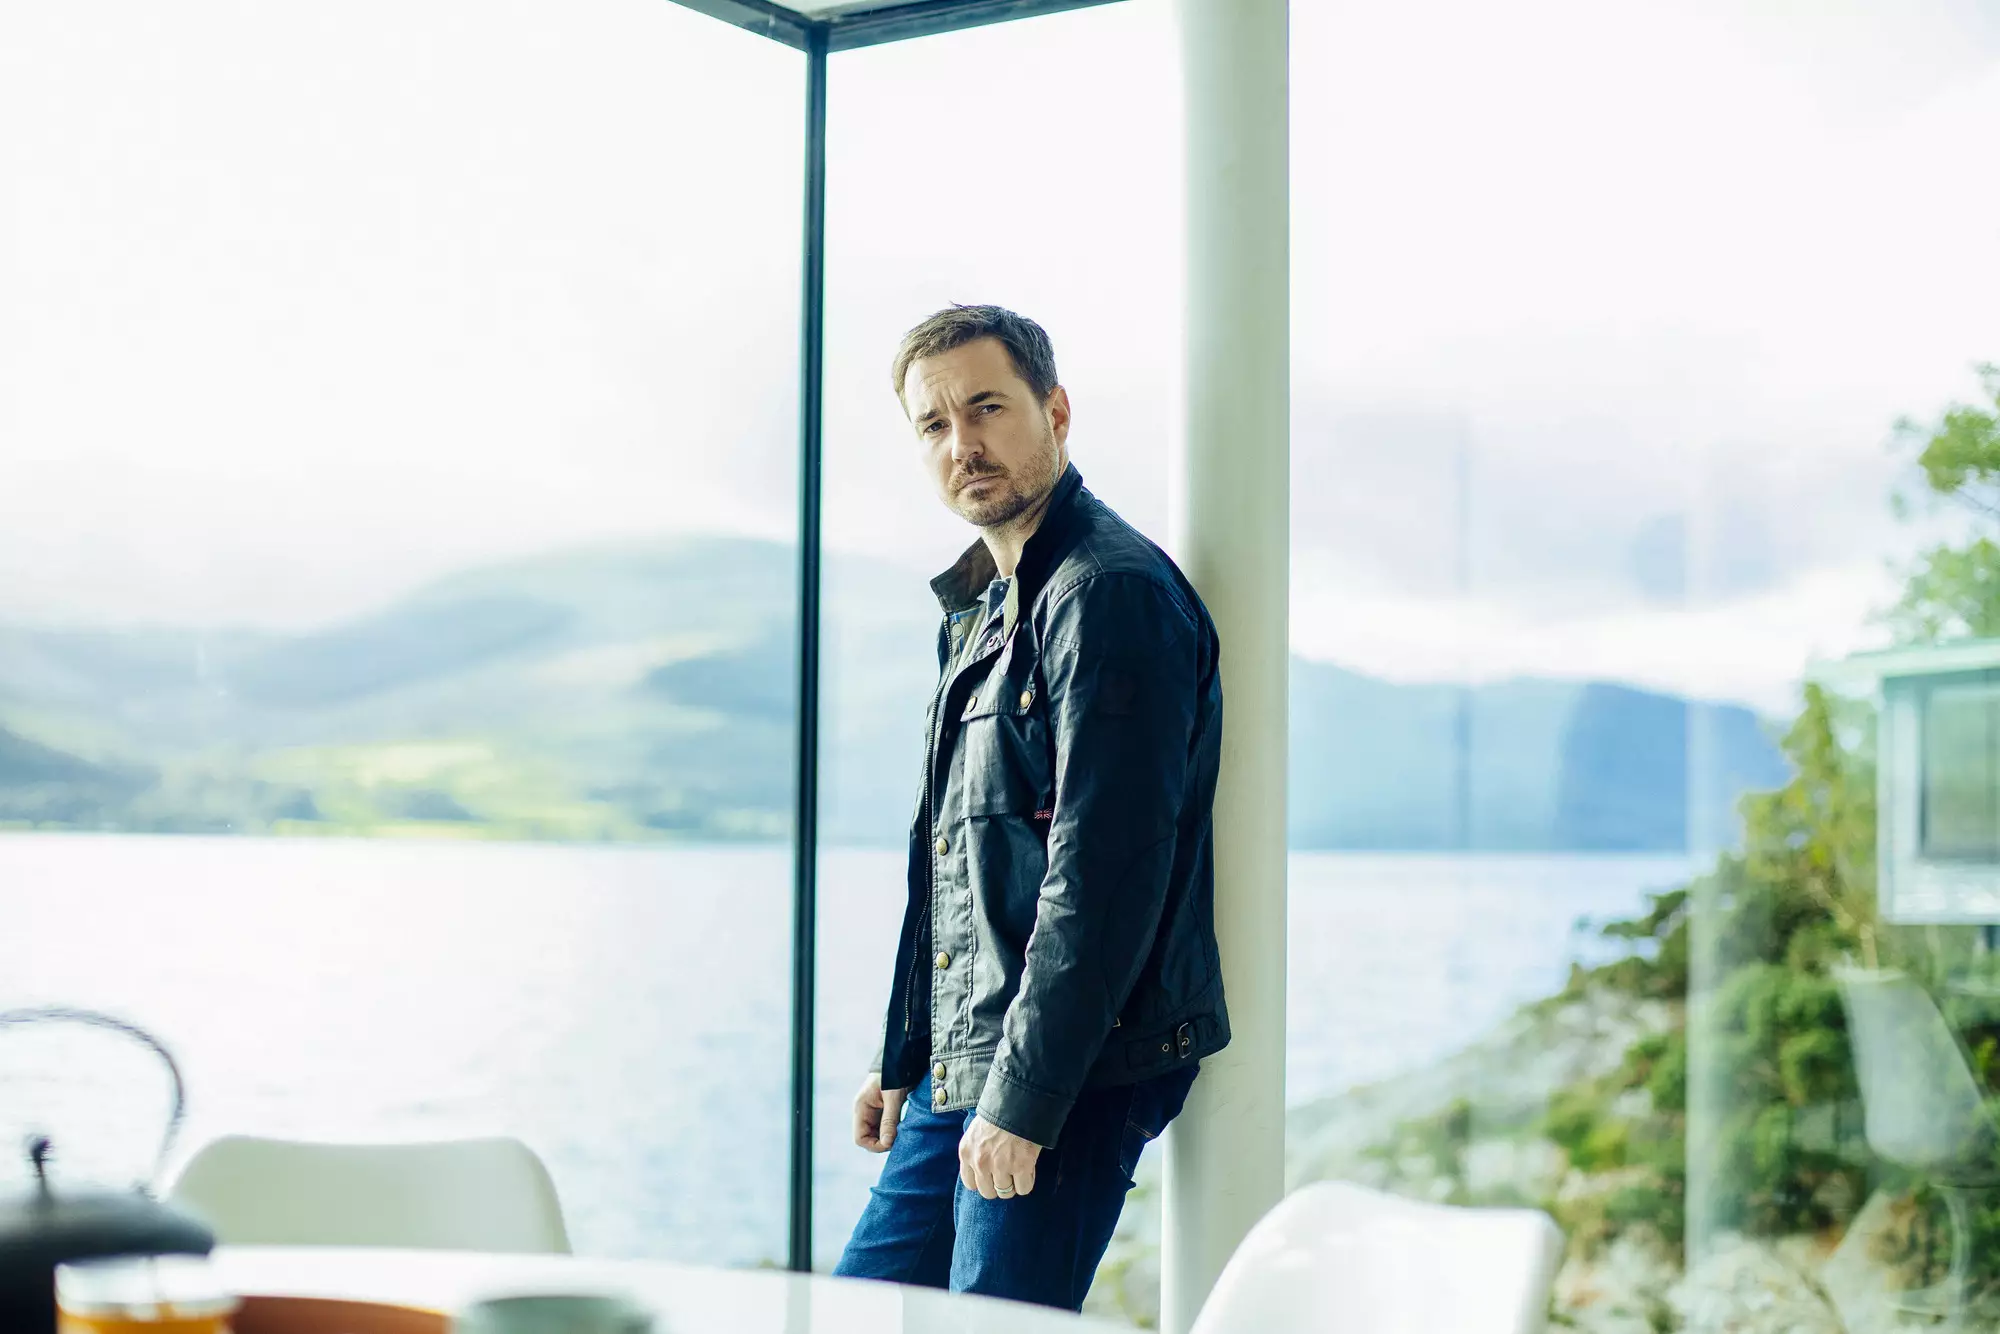 Gritty drama The Nest now has its first promotional images with Martin Compston (